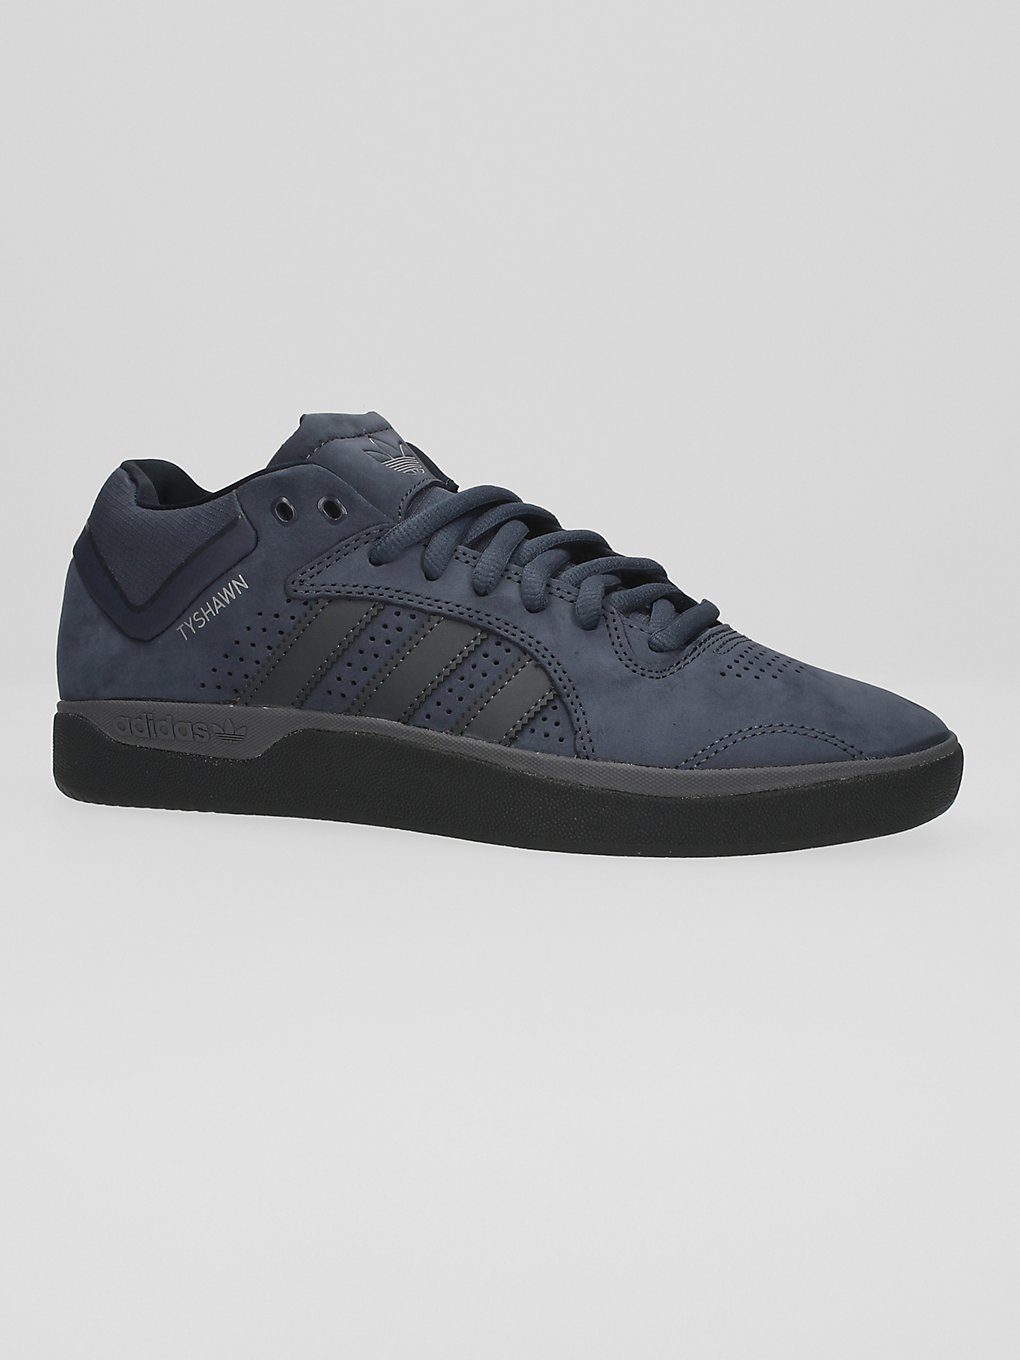 Adidas Skateboarding Tyshawn Skate Shoes shdw nvy/carbon/legnd ink